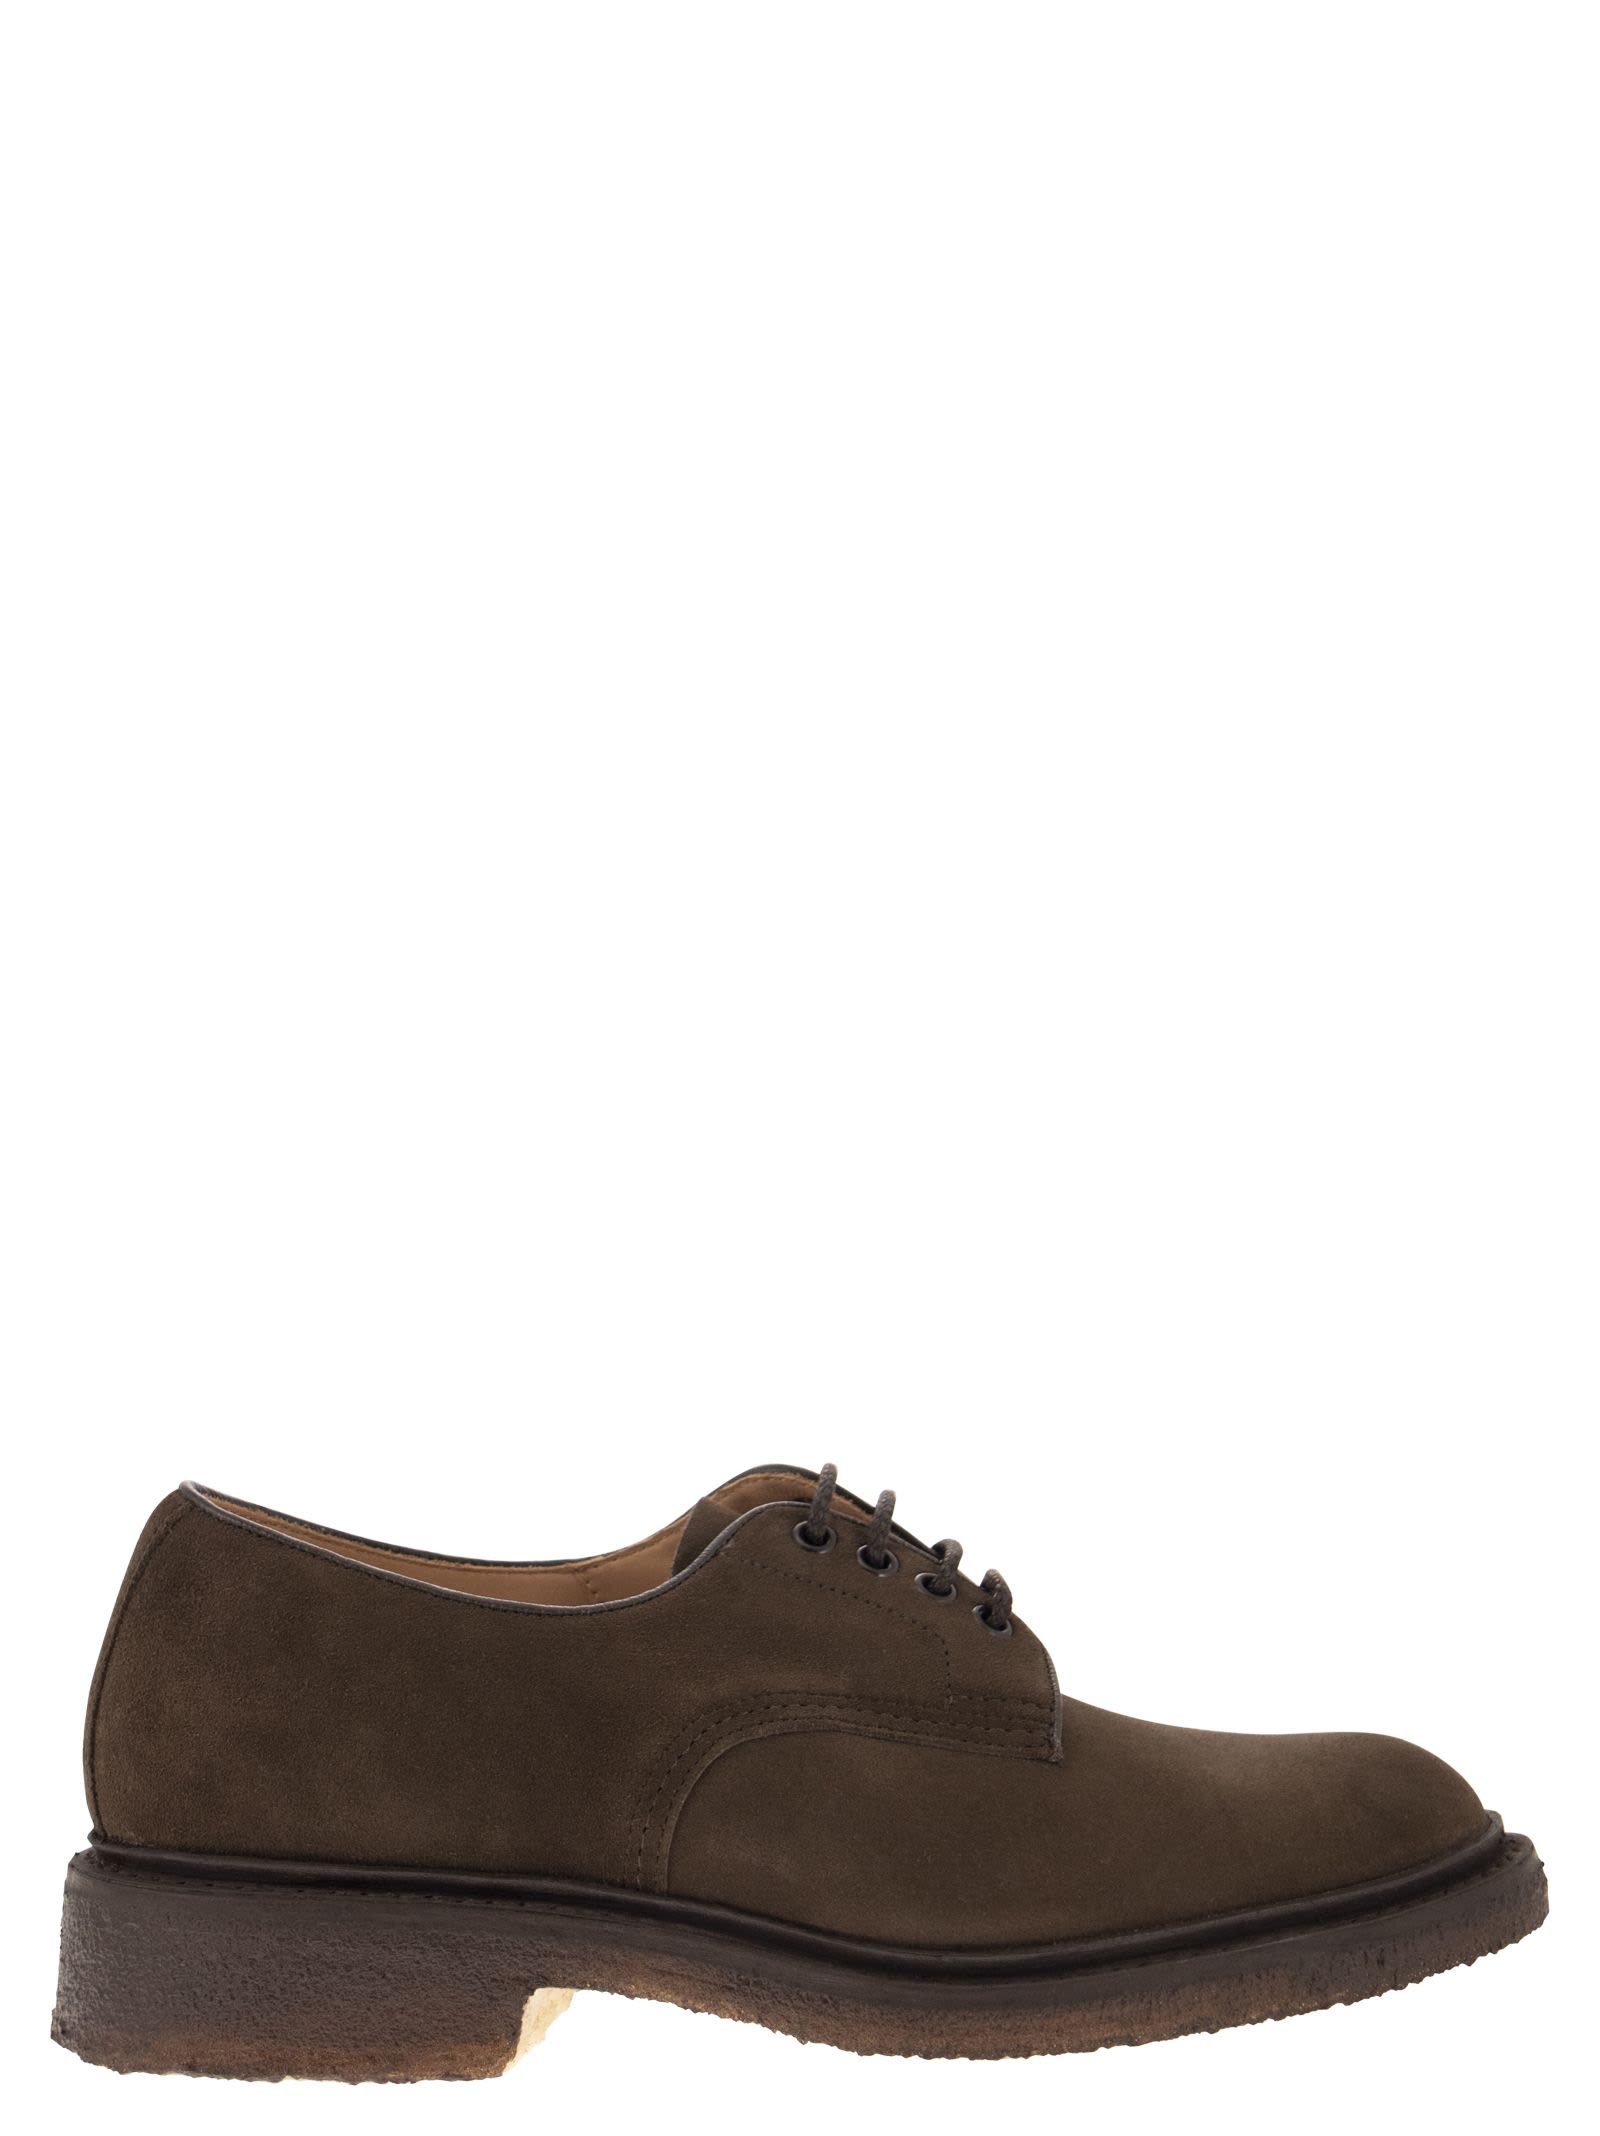 Daniel - Suede Leather Lace-up